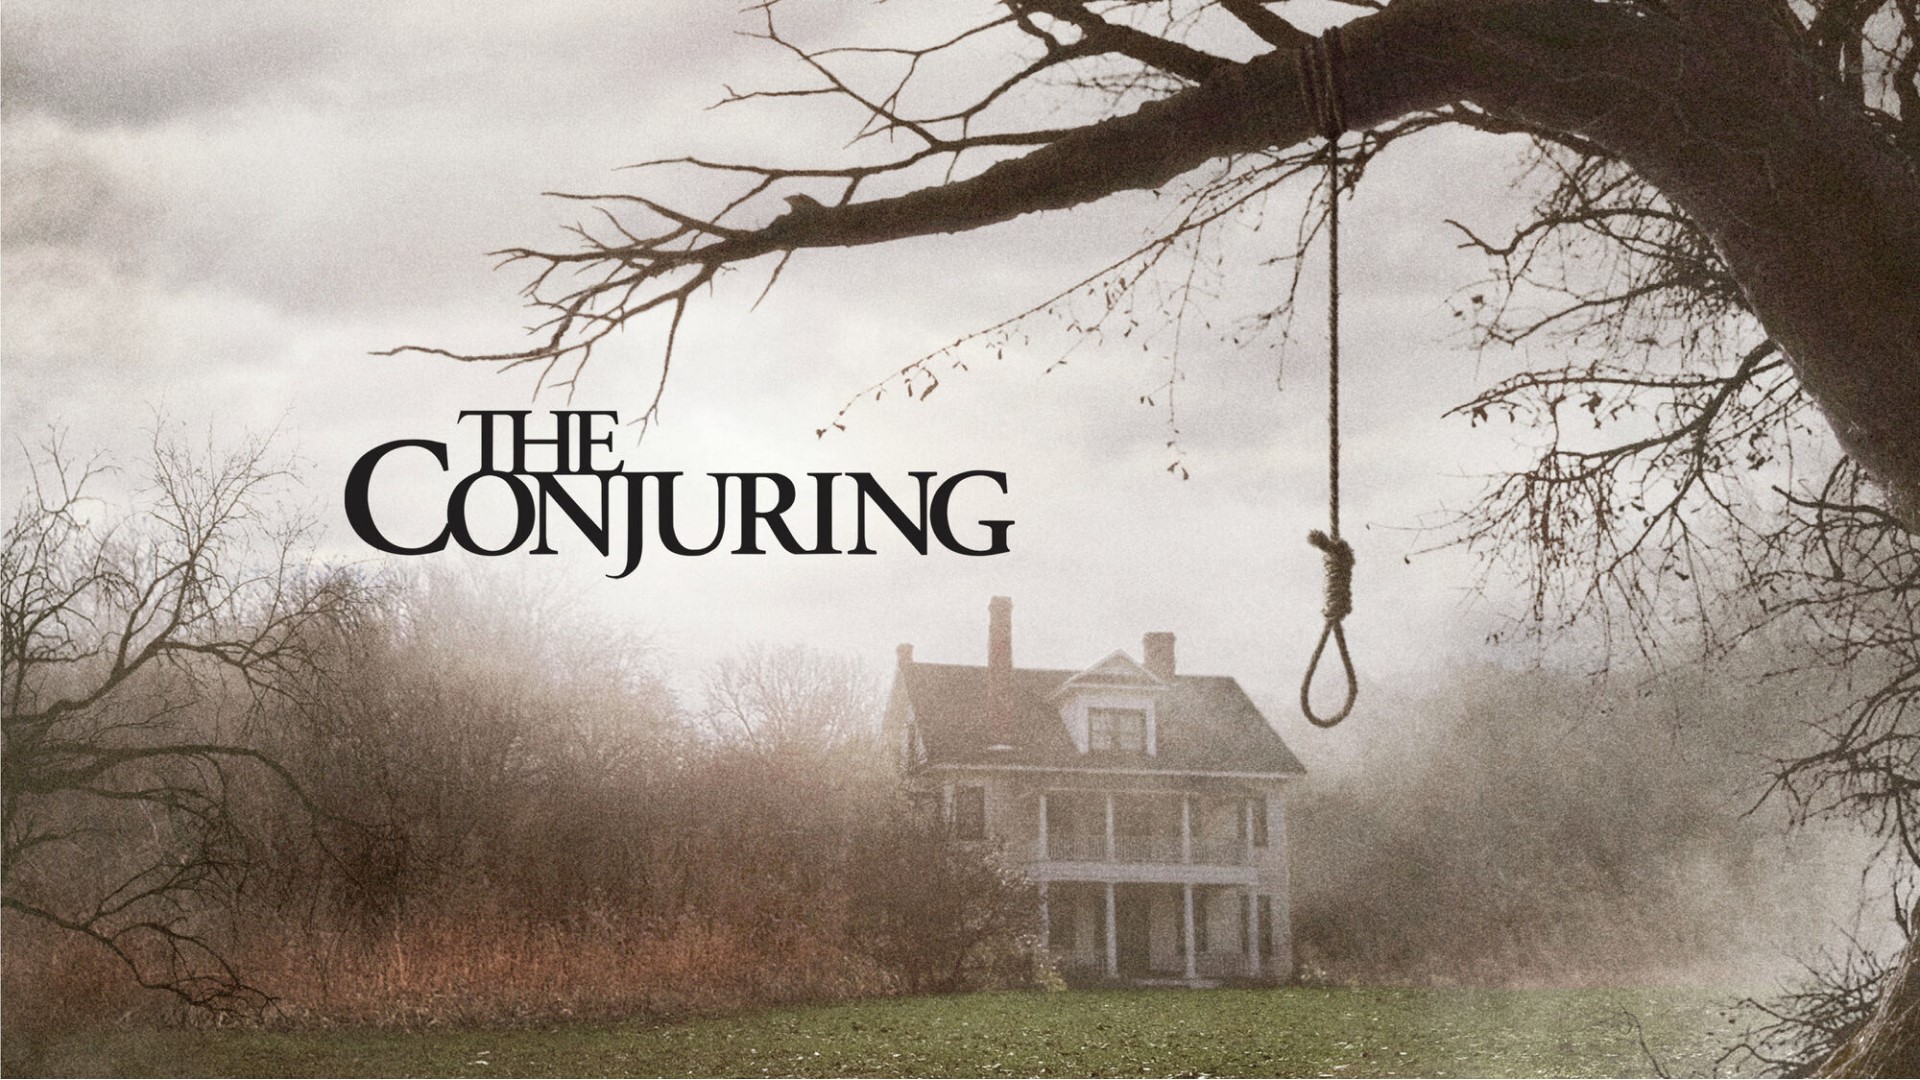 The conjuring movie